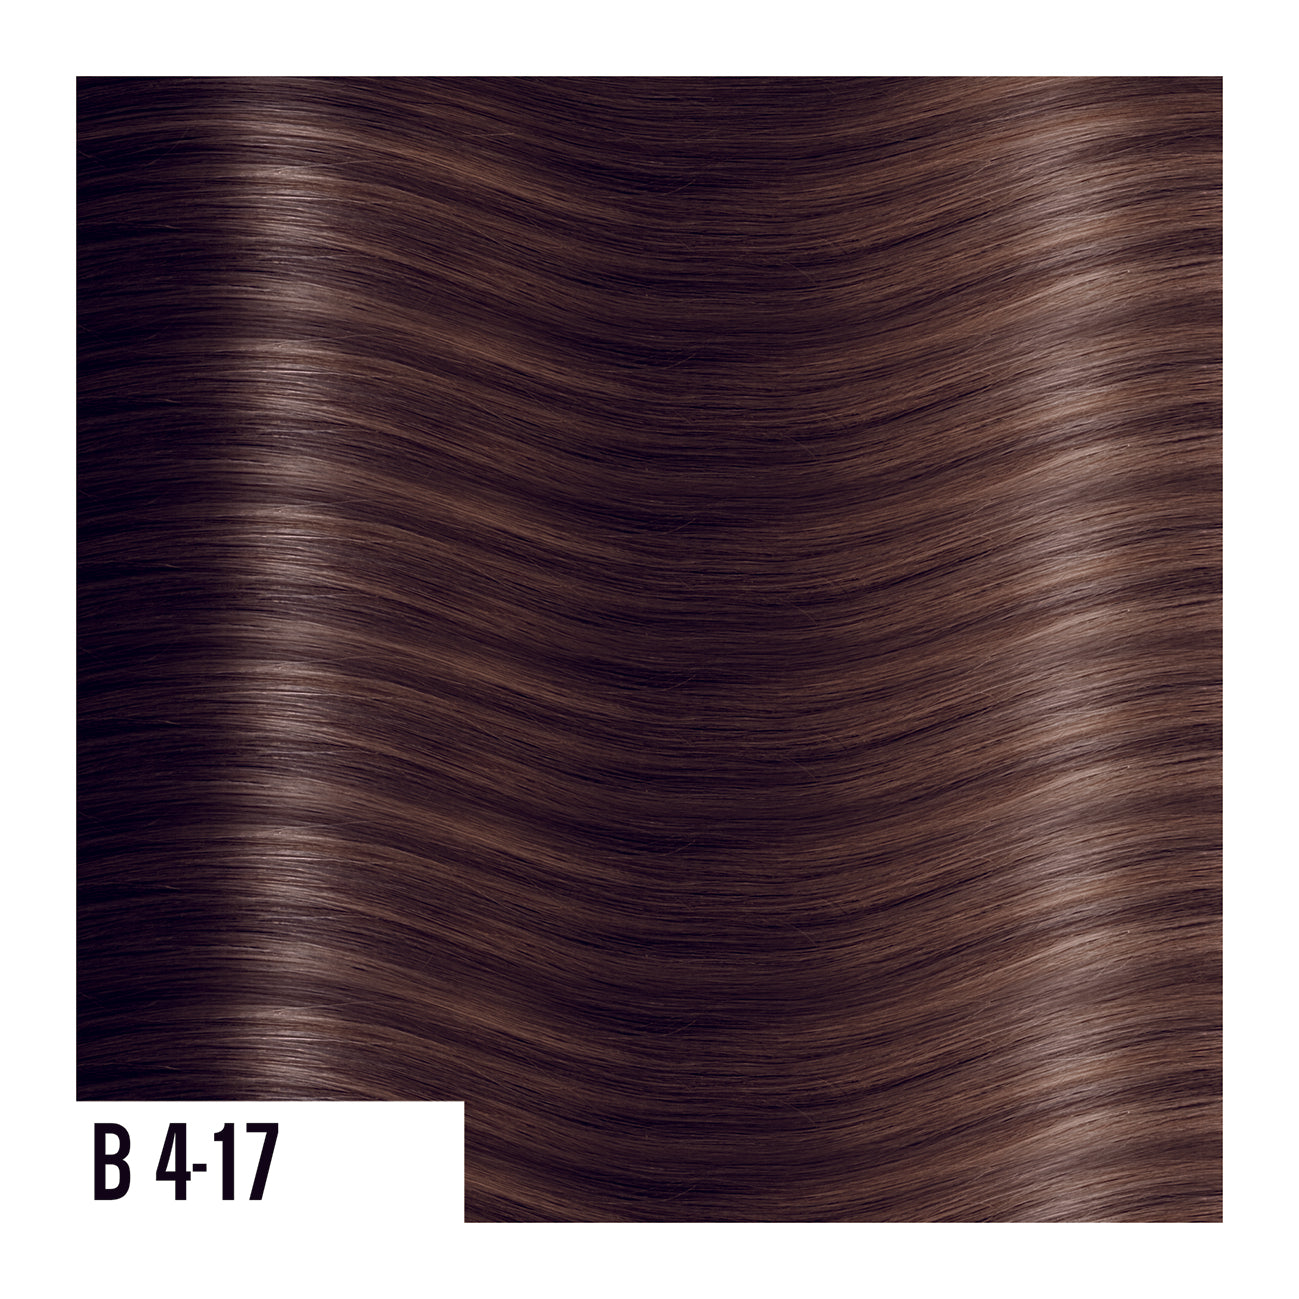 Keratin Extensions Blend of medium brown with light brown - Balayage colors are a perfect combination of natural colored roots that blends into highlighted ends.